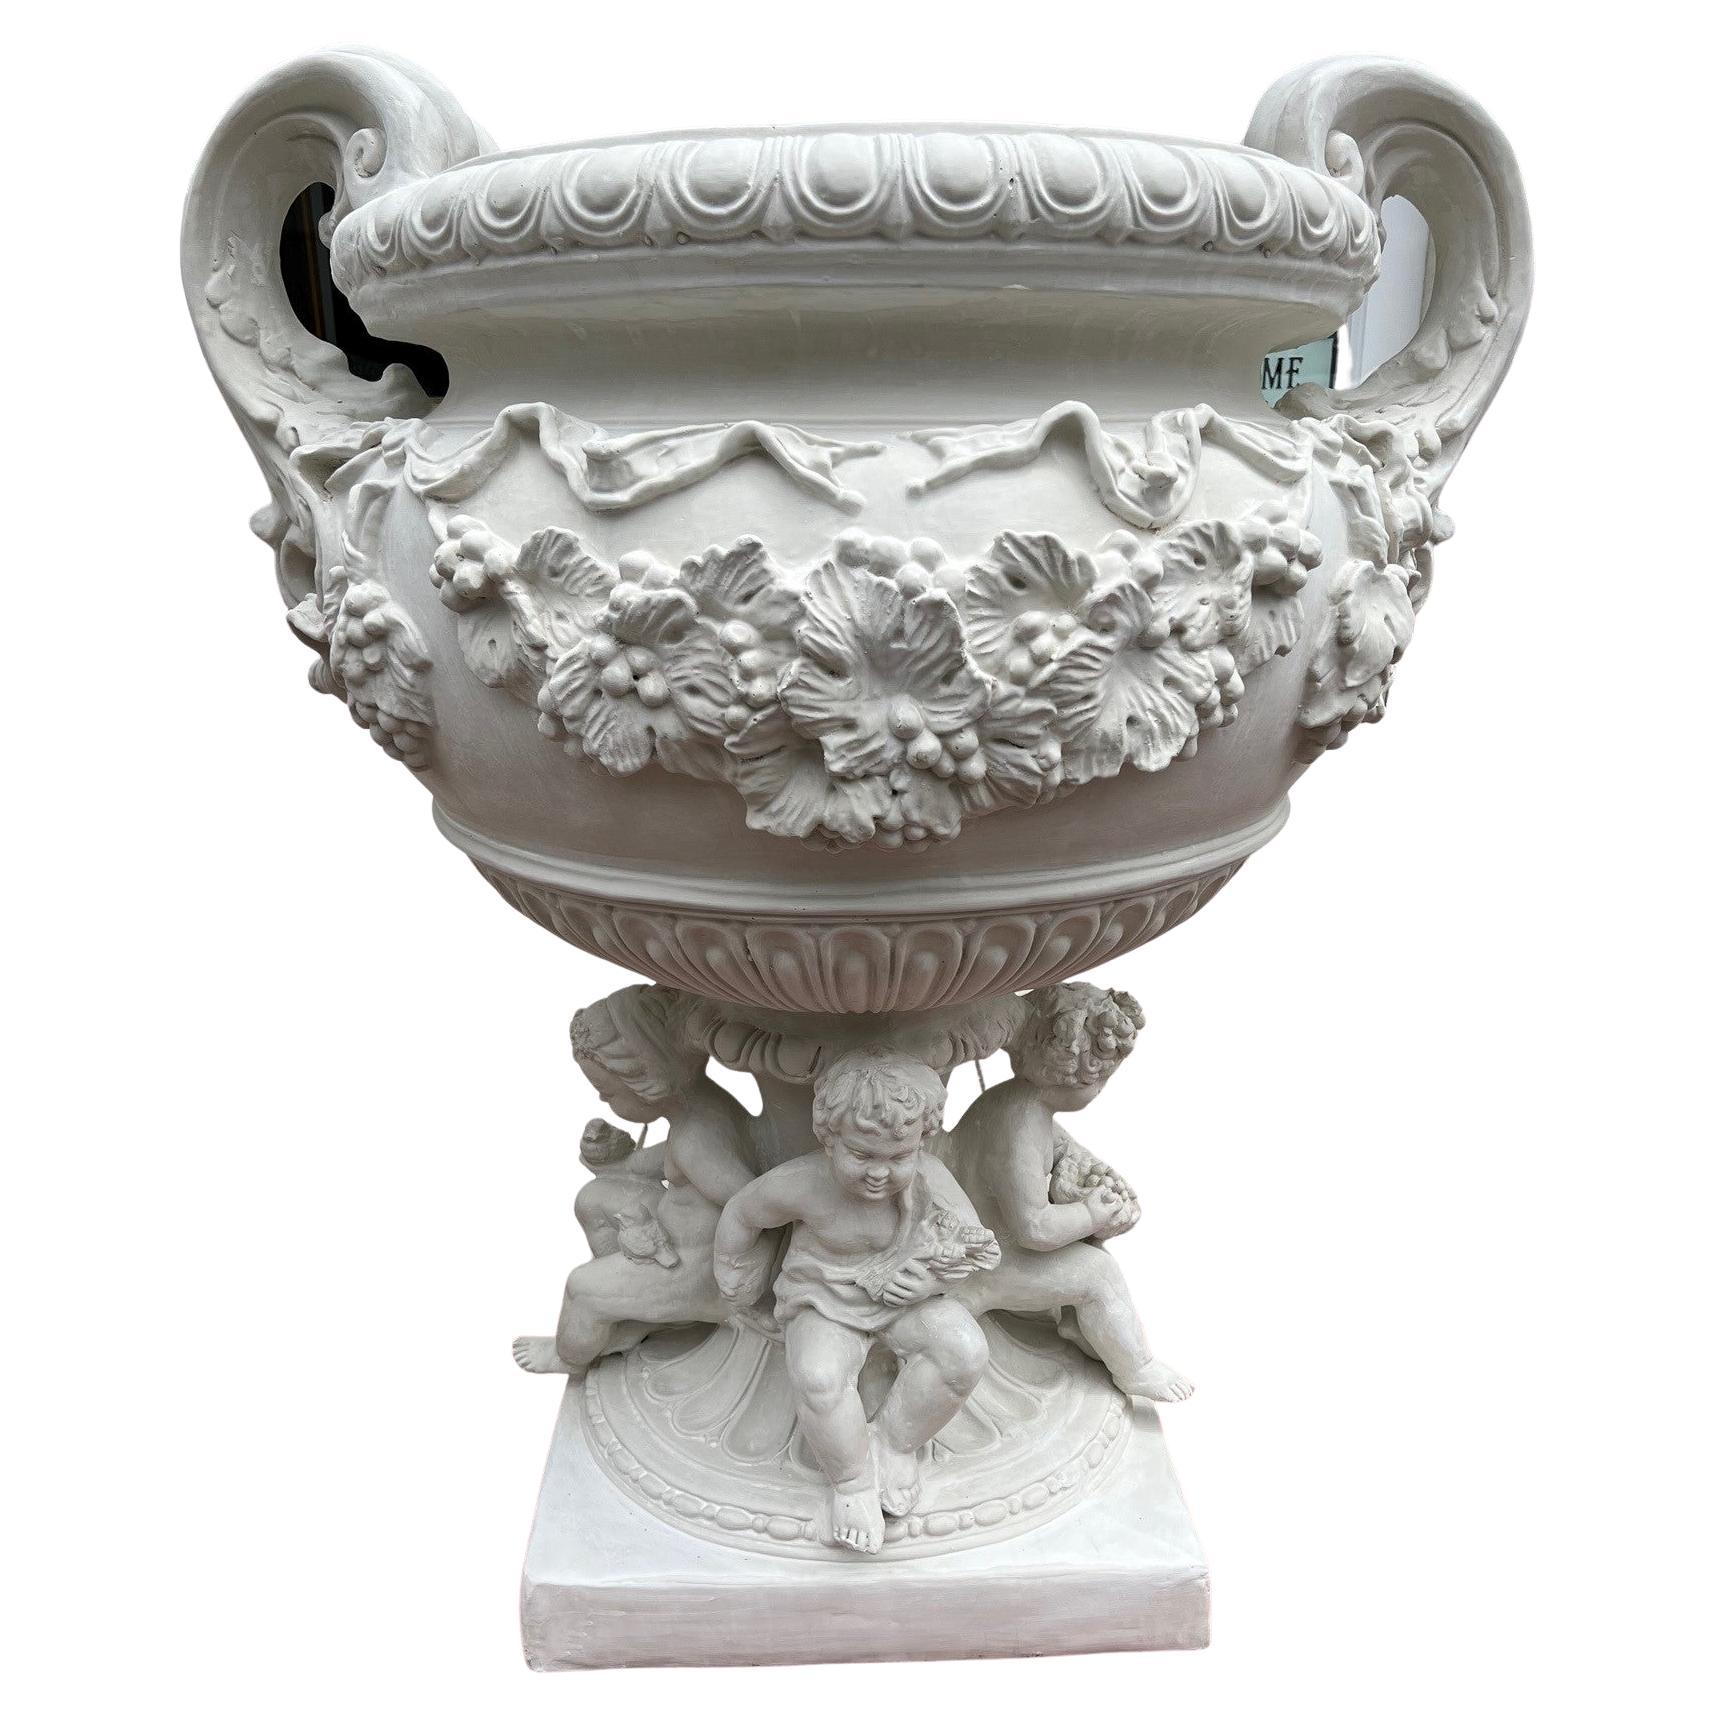 Reproduction White Fiberglass Urn with Large Handles Grape Vines and Cherubs   For Sale